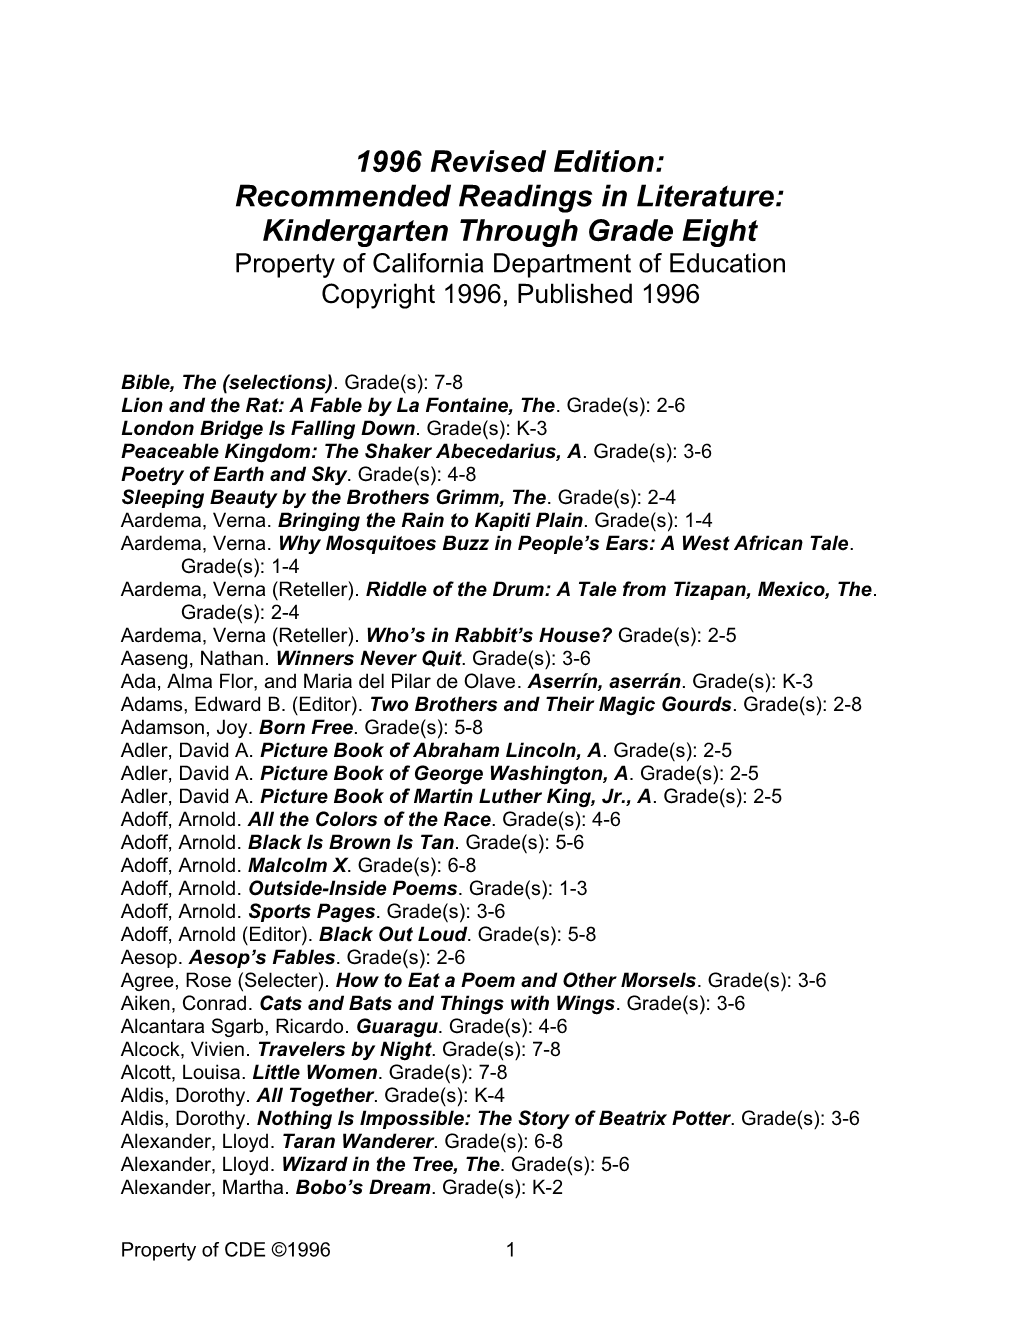 List4: Revised Rec Reading - Recommended Literature (CA Dept of Education)